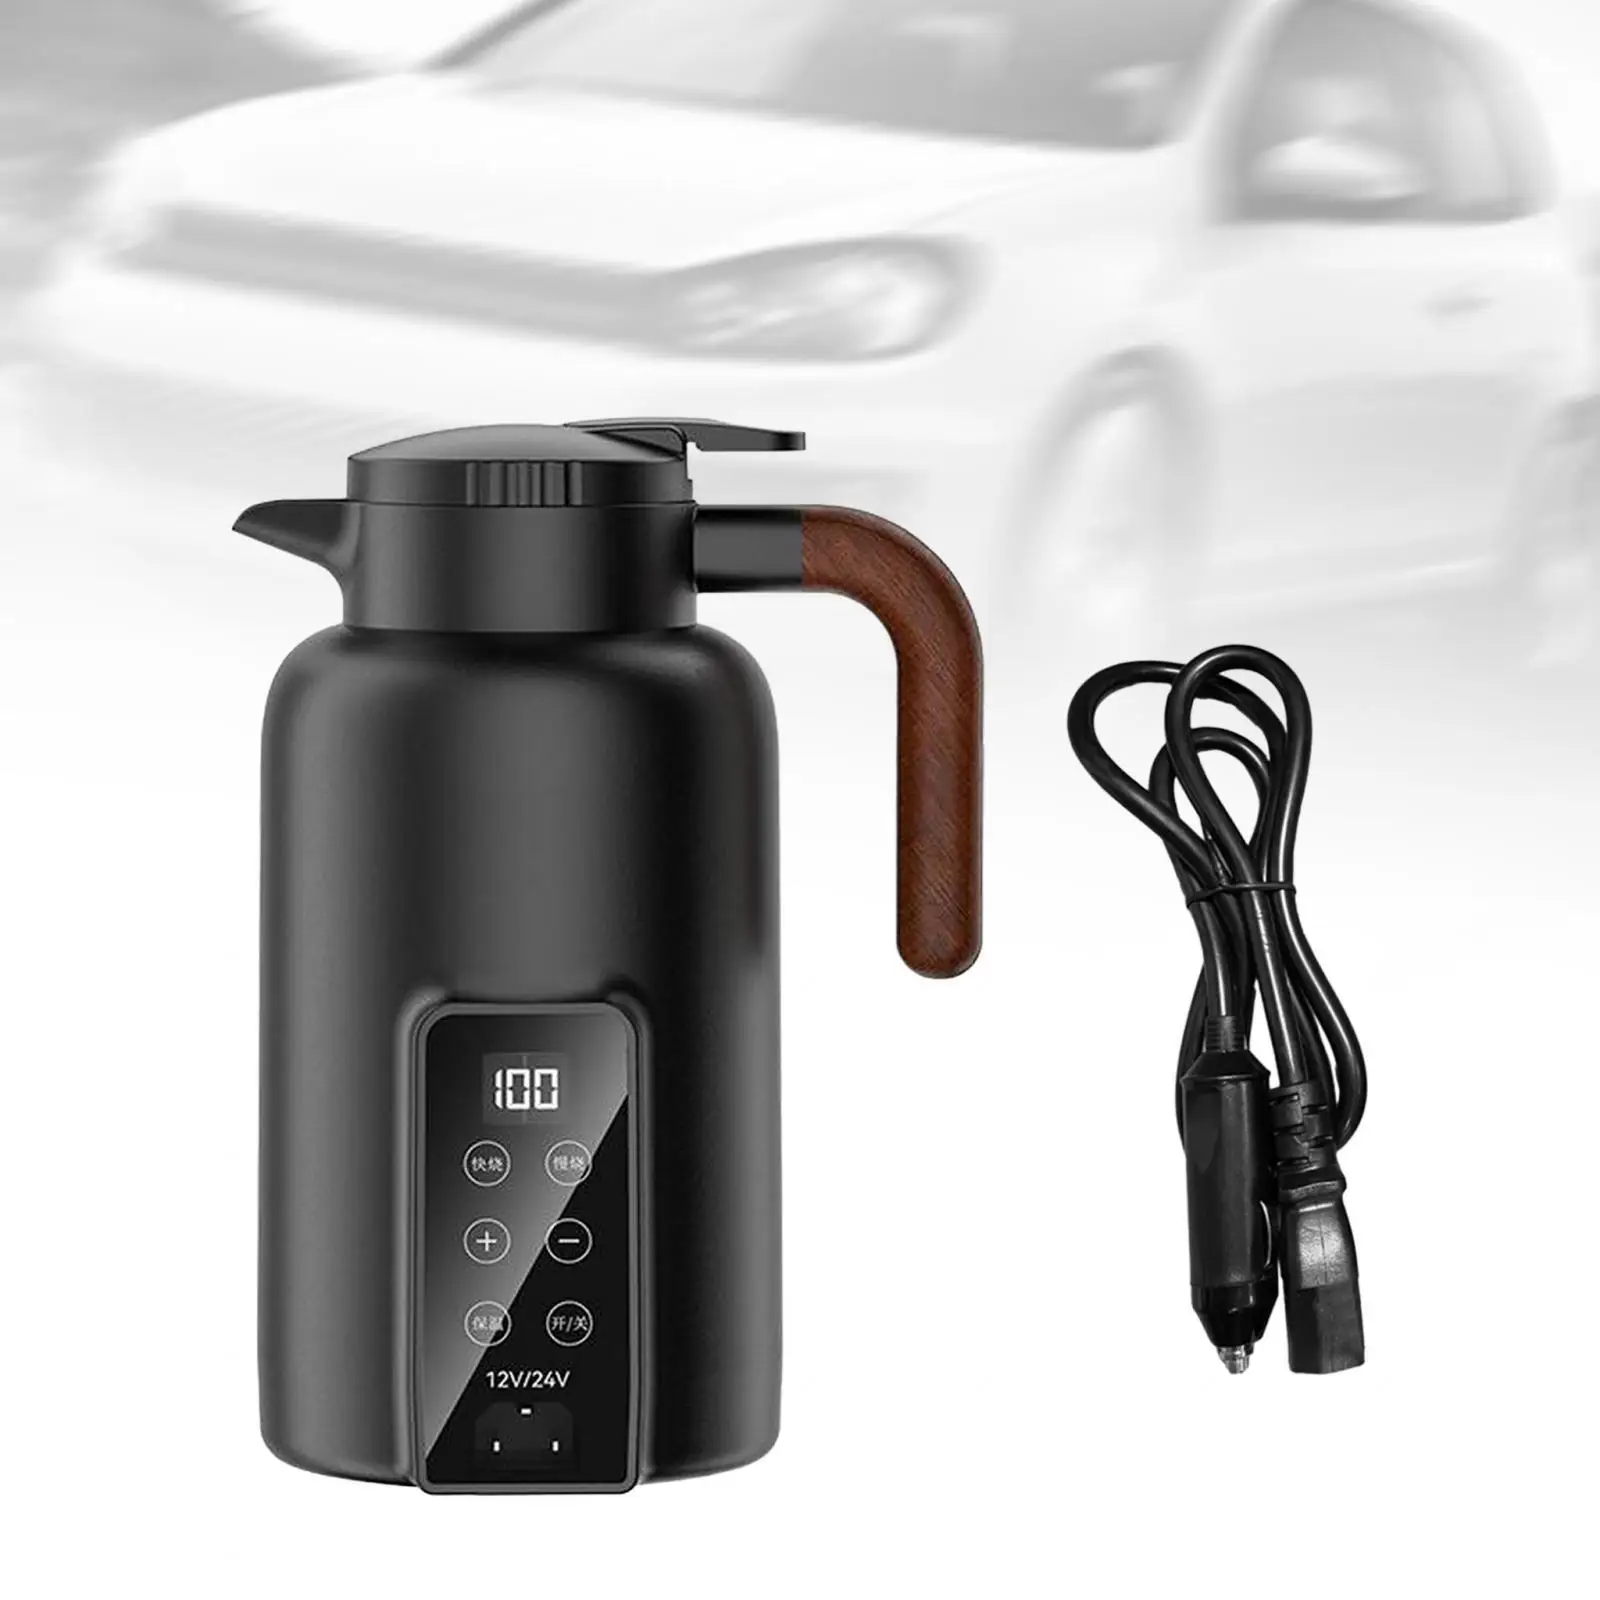 Car Heating Cup 304 Stainless Steel Travel Mug Electric Heat Water Cup for Tea Heating Water Beverage Milk Heated Camping